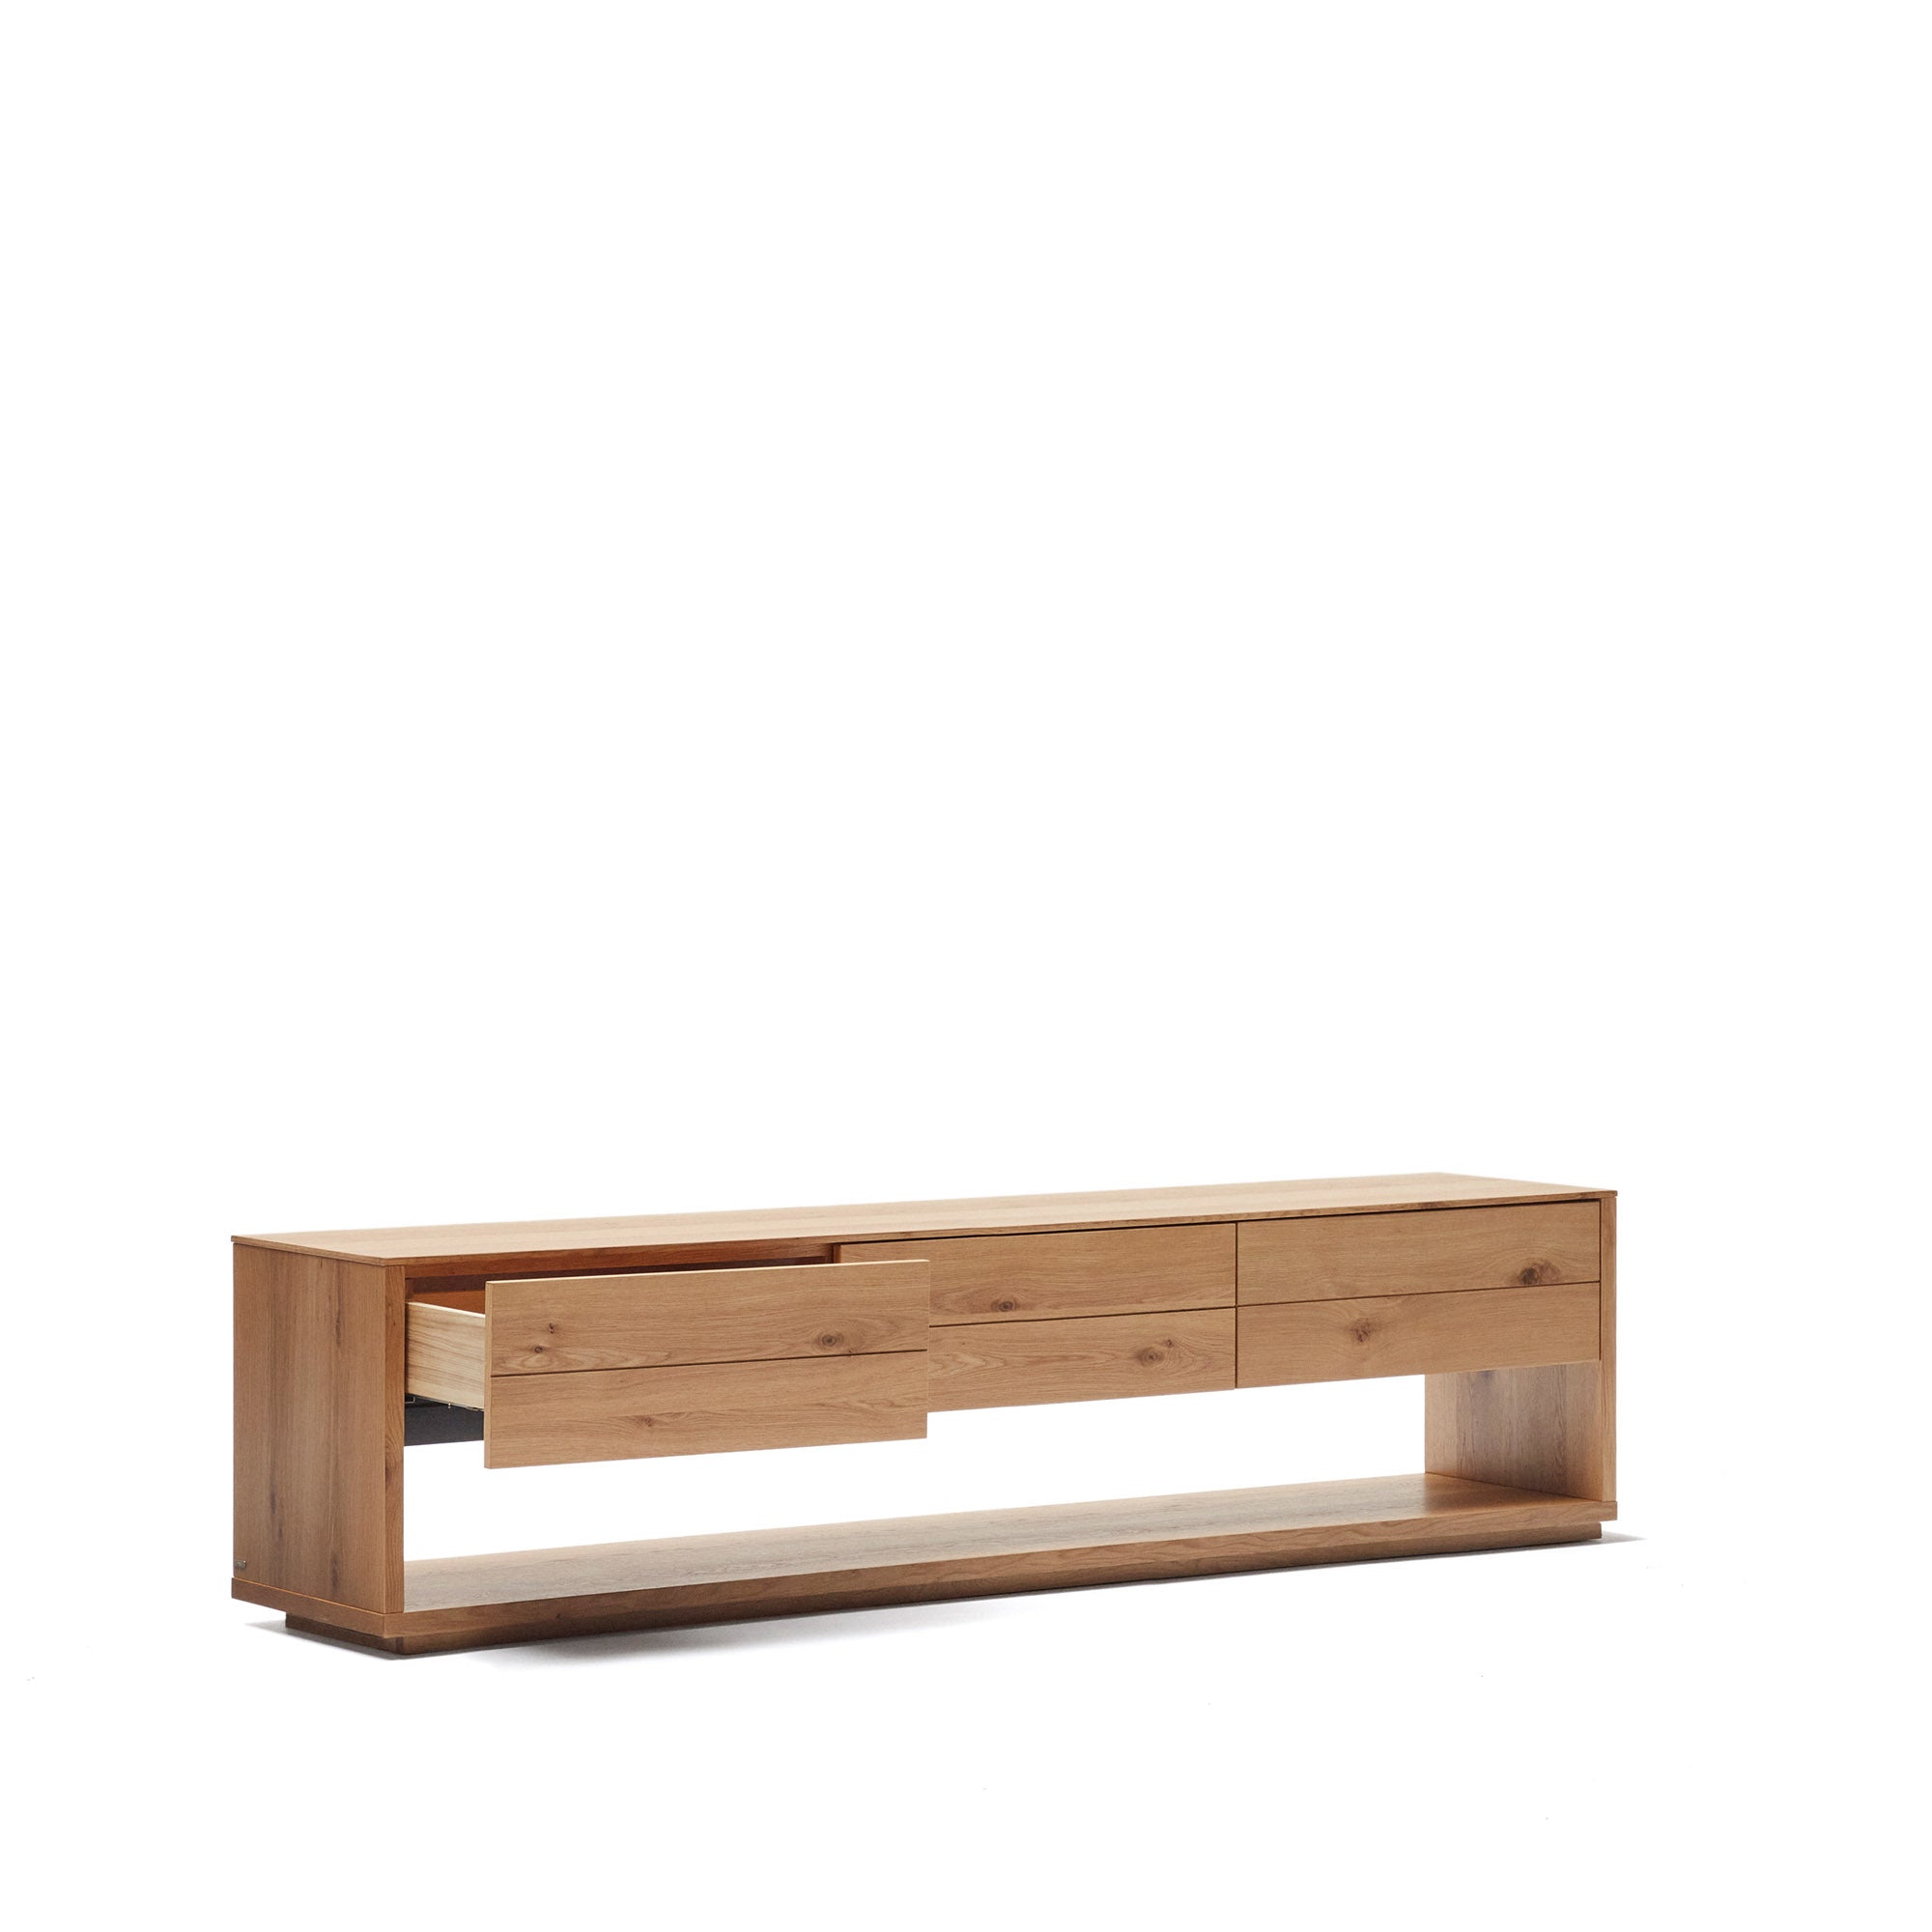 Alguema TV stand with 3 drawers in oak veneer with natural finish, 200 x 51 cm